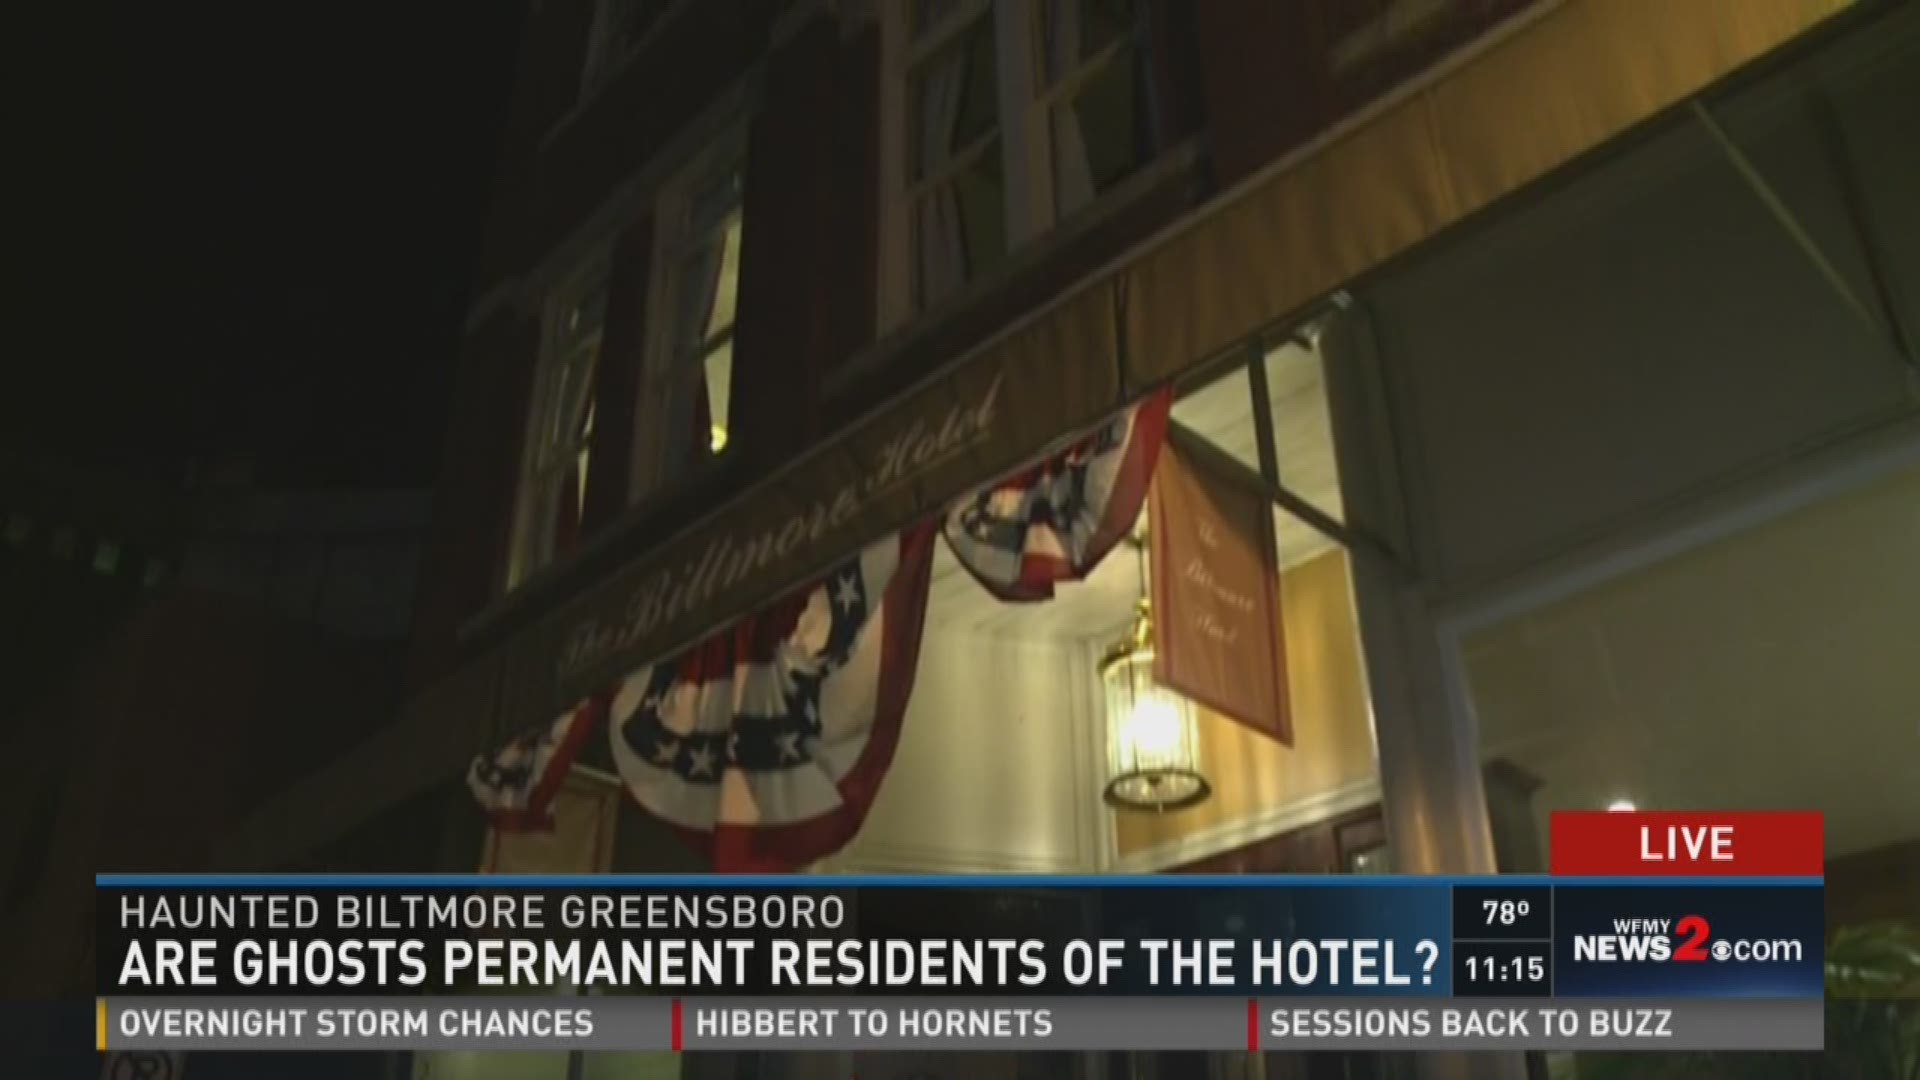 Are Ghosts Permanent Residents Of The Hotel?